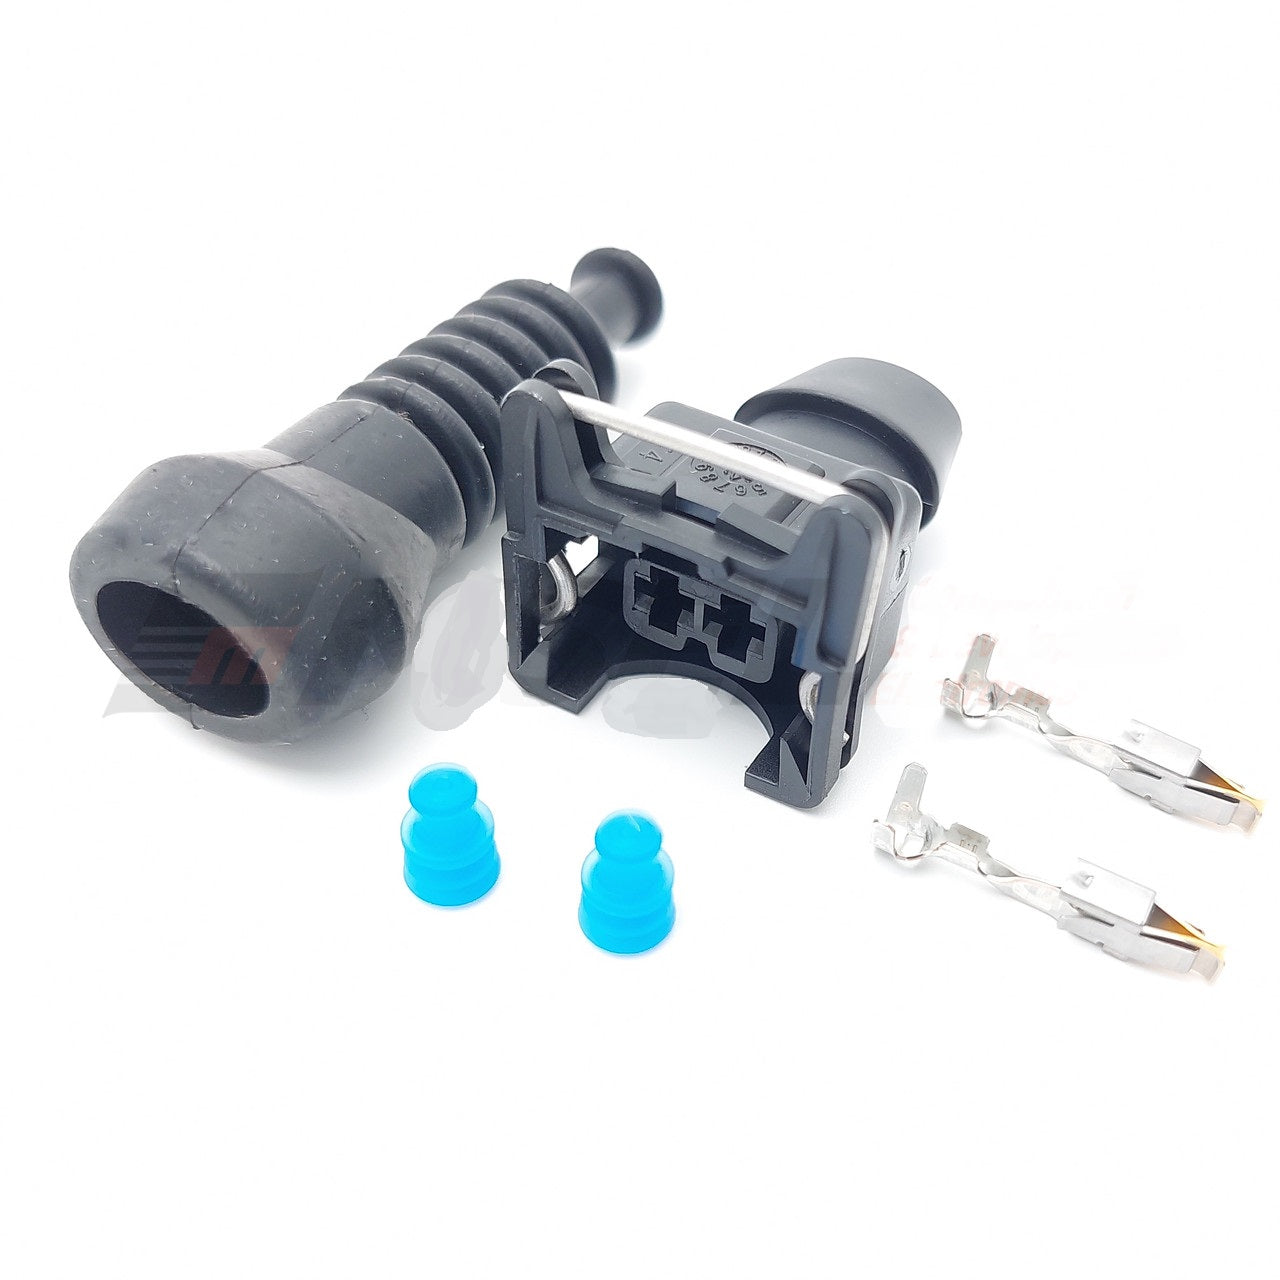 Bosch 1550cc top feed injector